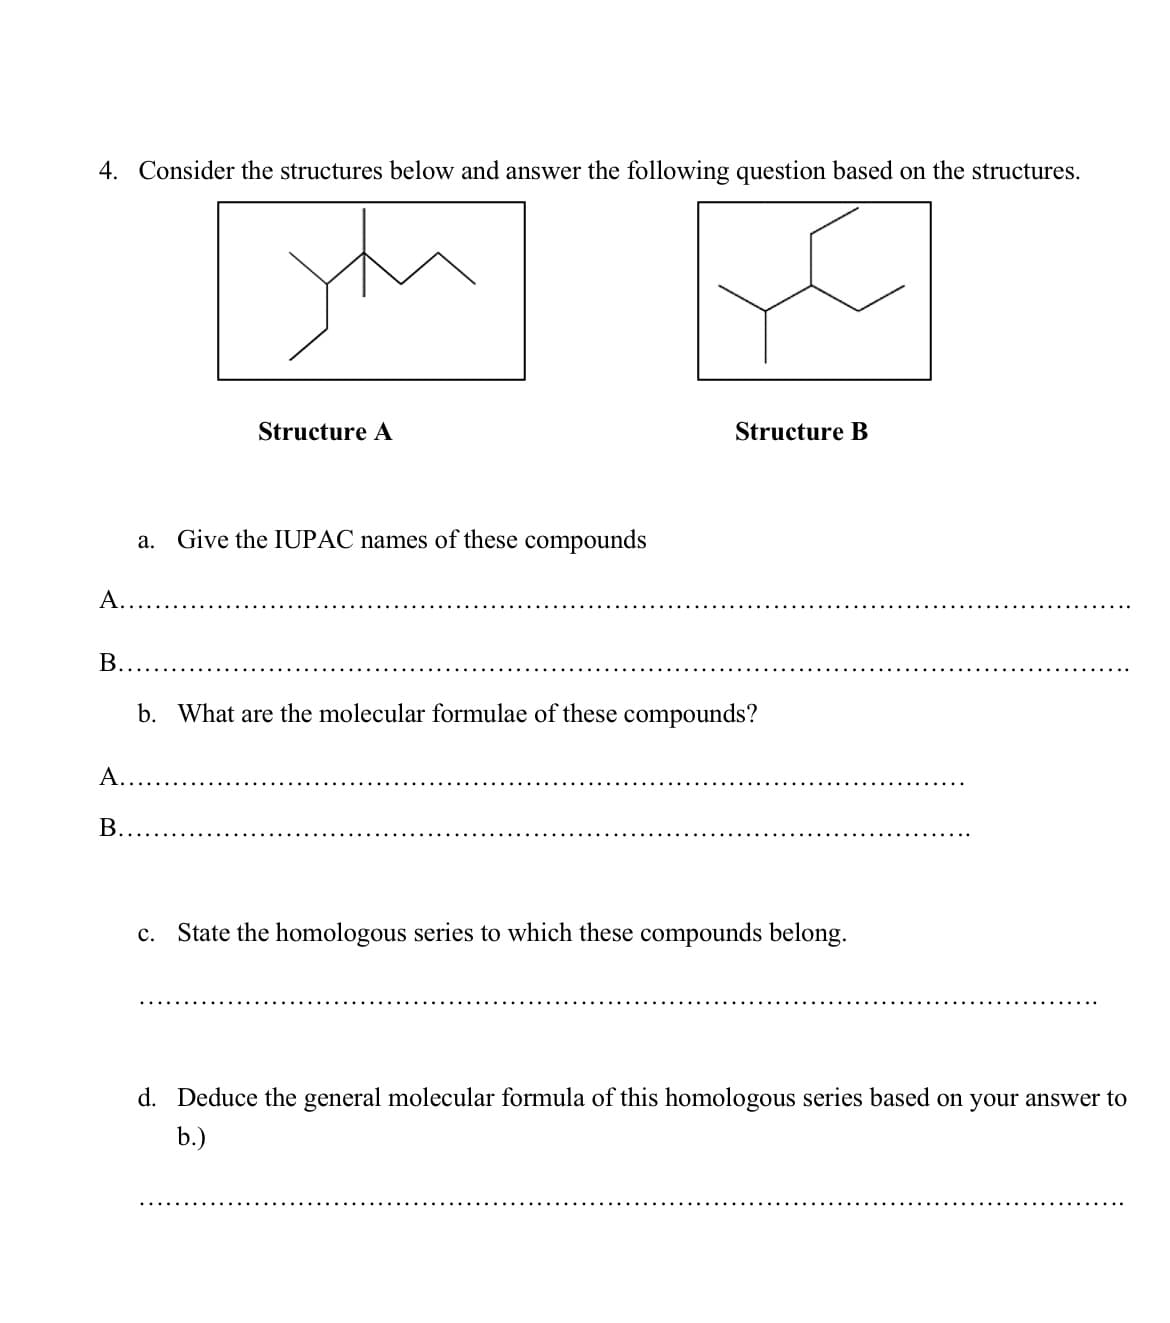 4. Consider the structures below and answer the following question based on the structures.
Structure A
Structure B
a. Give the IUPAC names of these compounds
A....
B.....
b. What are the molecular formulae of these compounds?
A..
B.
c. State the homologous series to which these compounds belong.
d. Deduce the general molecular formula of this homologous series based on your answer to
b.)